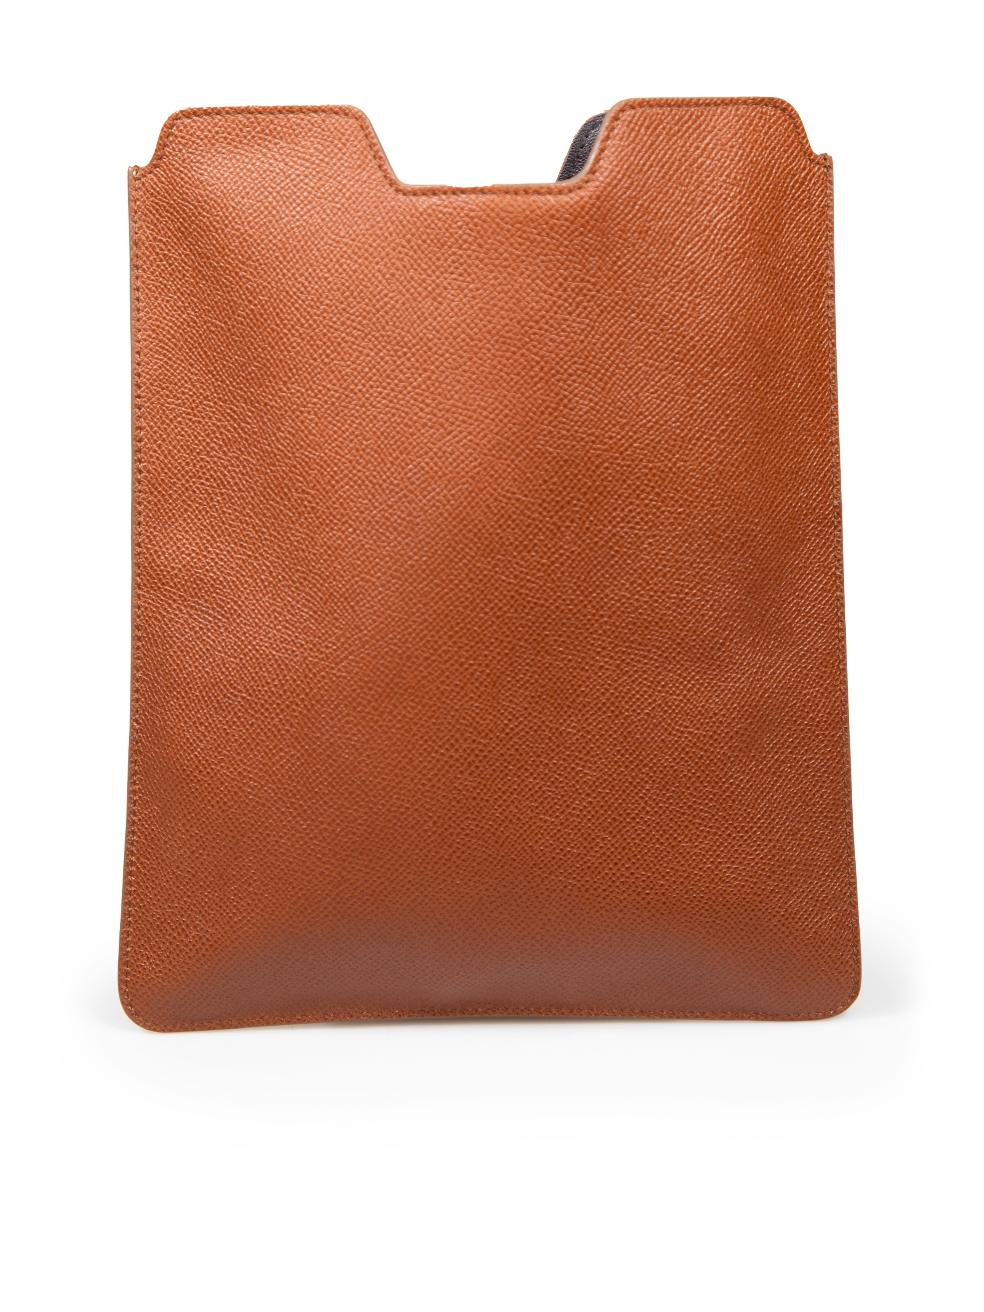 Bally Brown Grained Leather iPad Cover In Excellent Condition For Sale In London, GB